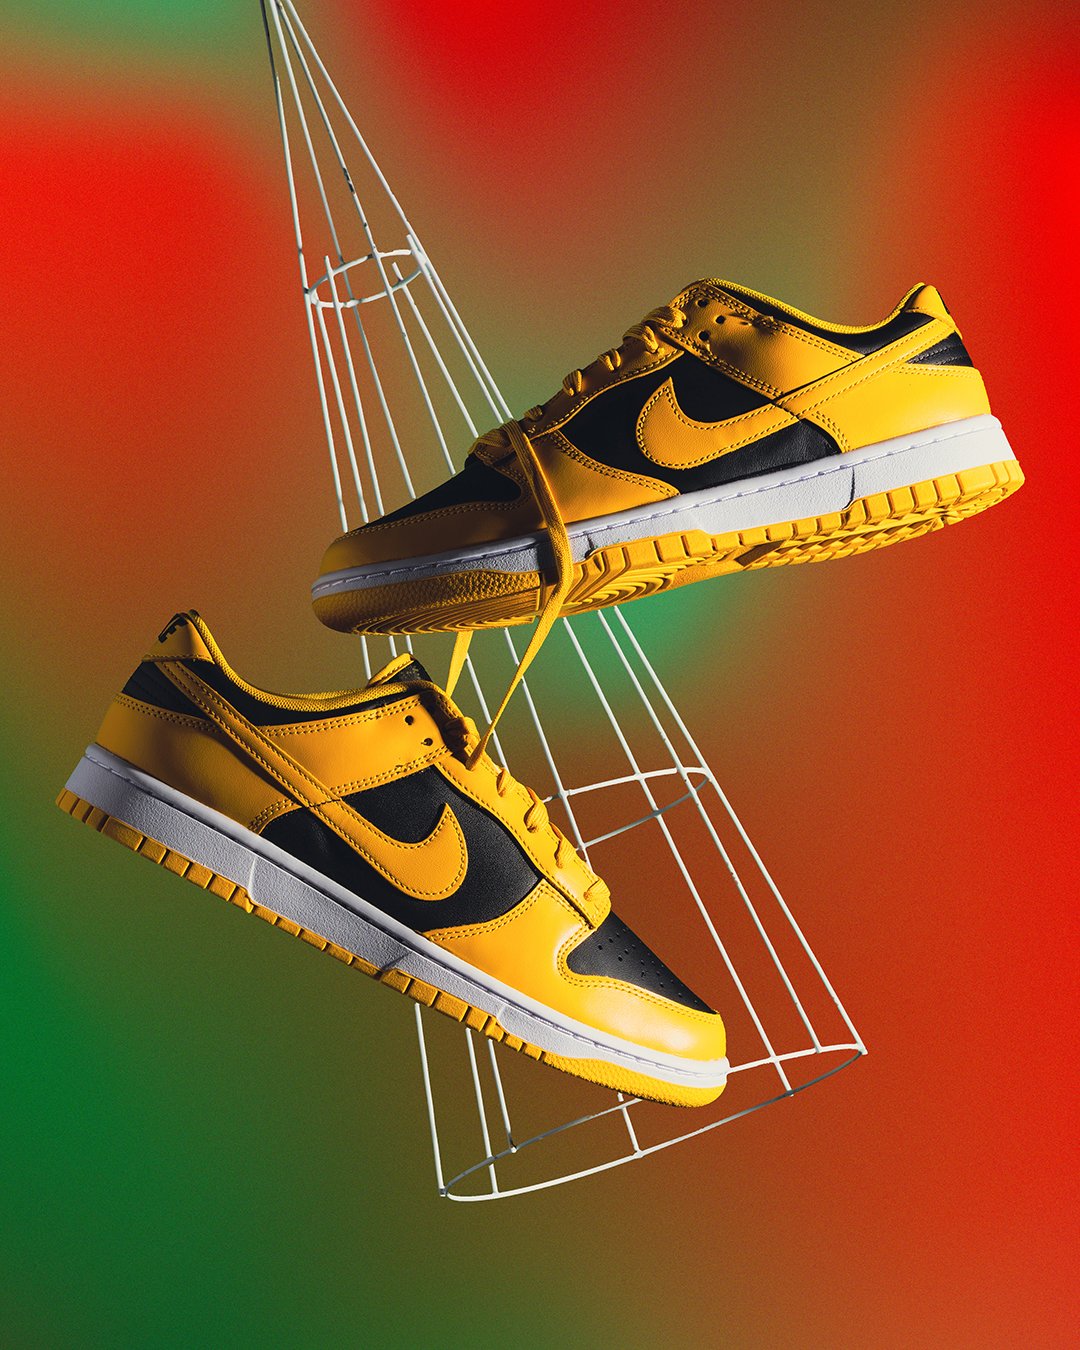 Obediente Impotencia Impermeable Foot Locker on Twitter: "Heritage color blocking for a classic feel. #Nike  Dunk Low 'Goldenrod' launches 12.16 Reservations are open for Ship to Me  and Store Pickup through the Foot Locker App. #